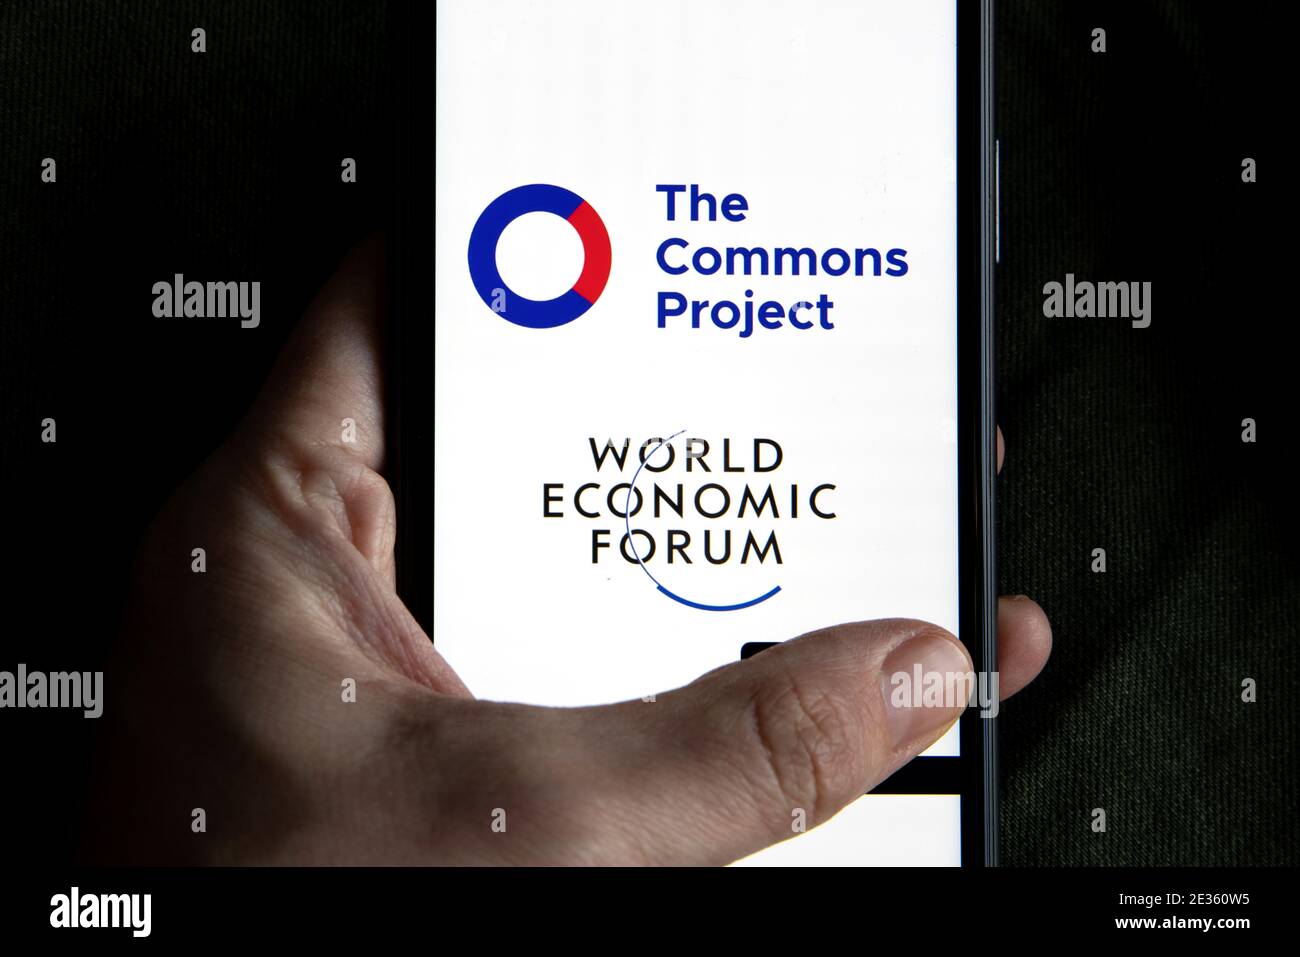 Vaccine passport app company logo displayed on a smartphone next to world economic forum logo. The Commons pass Project. Travel again. Stock Photo